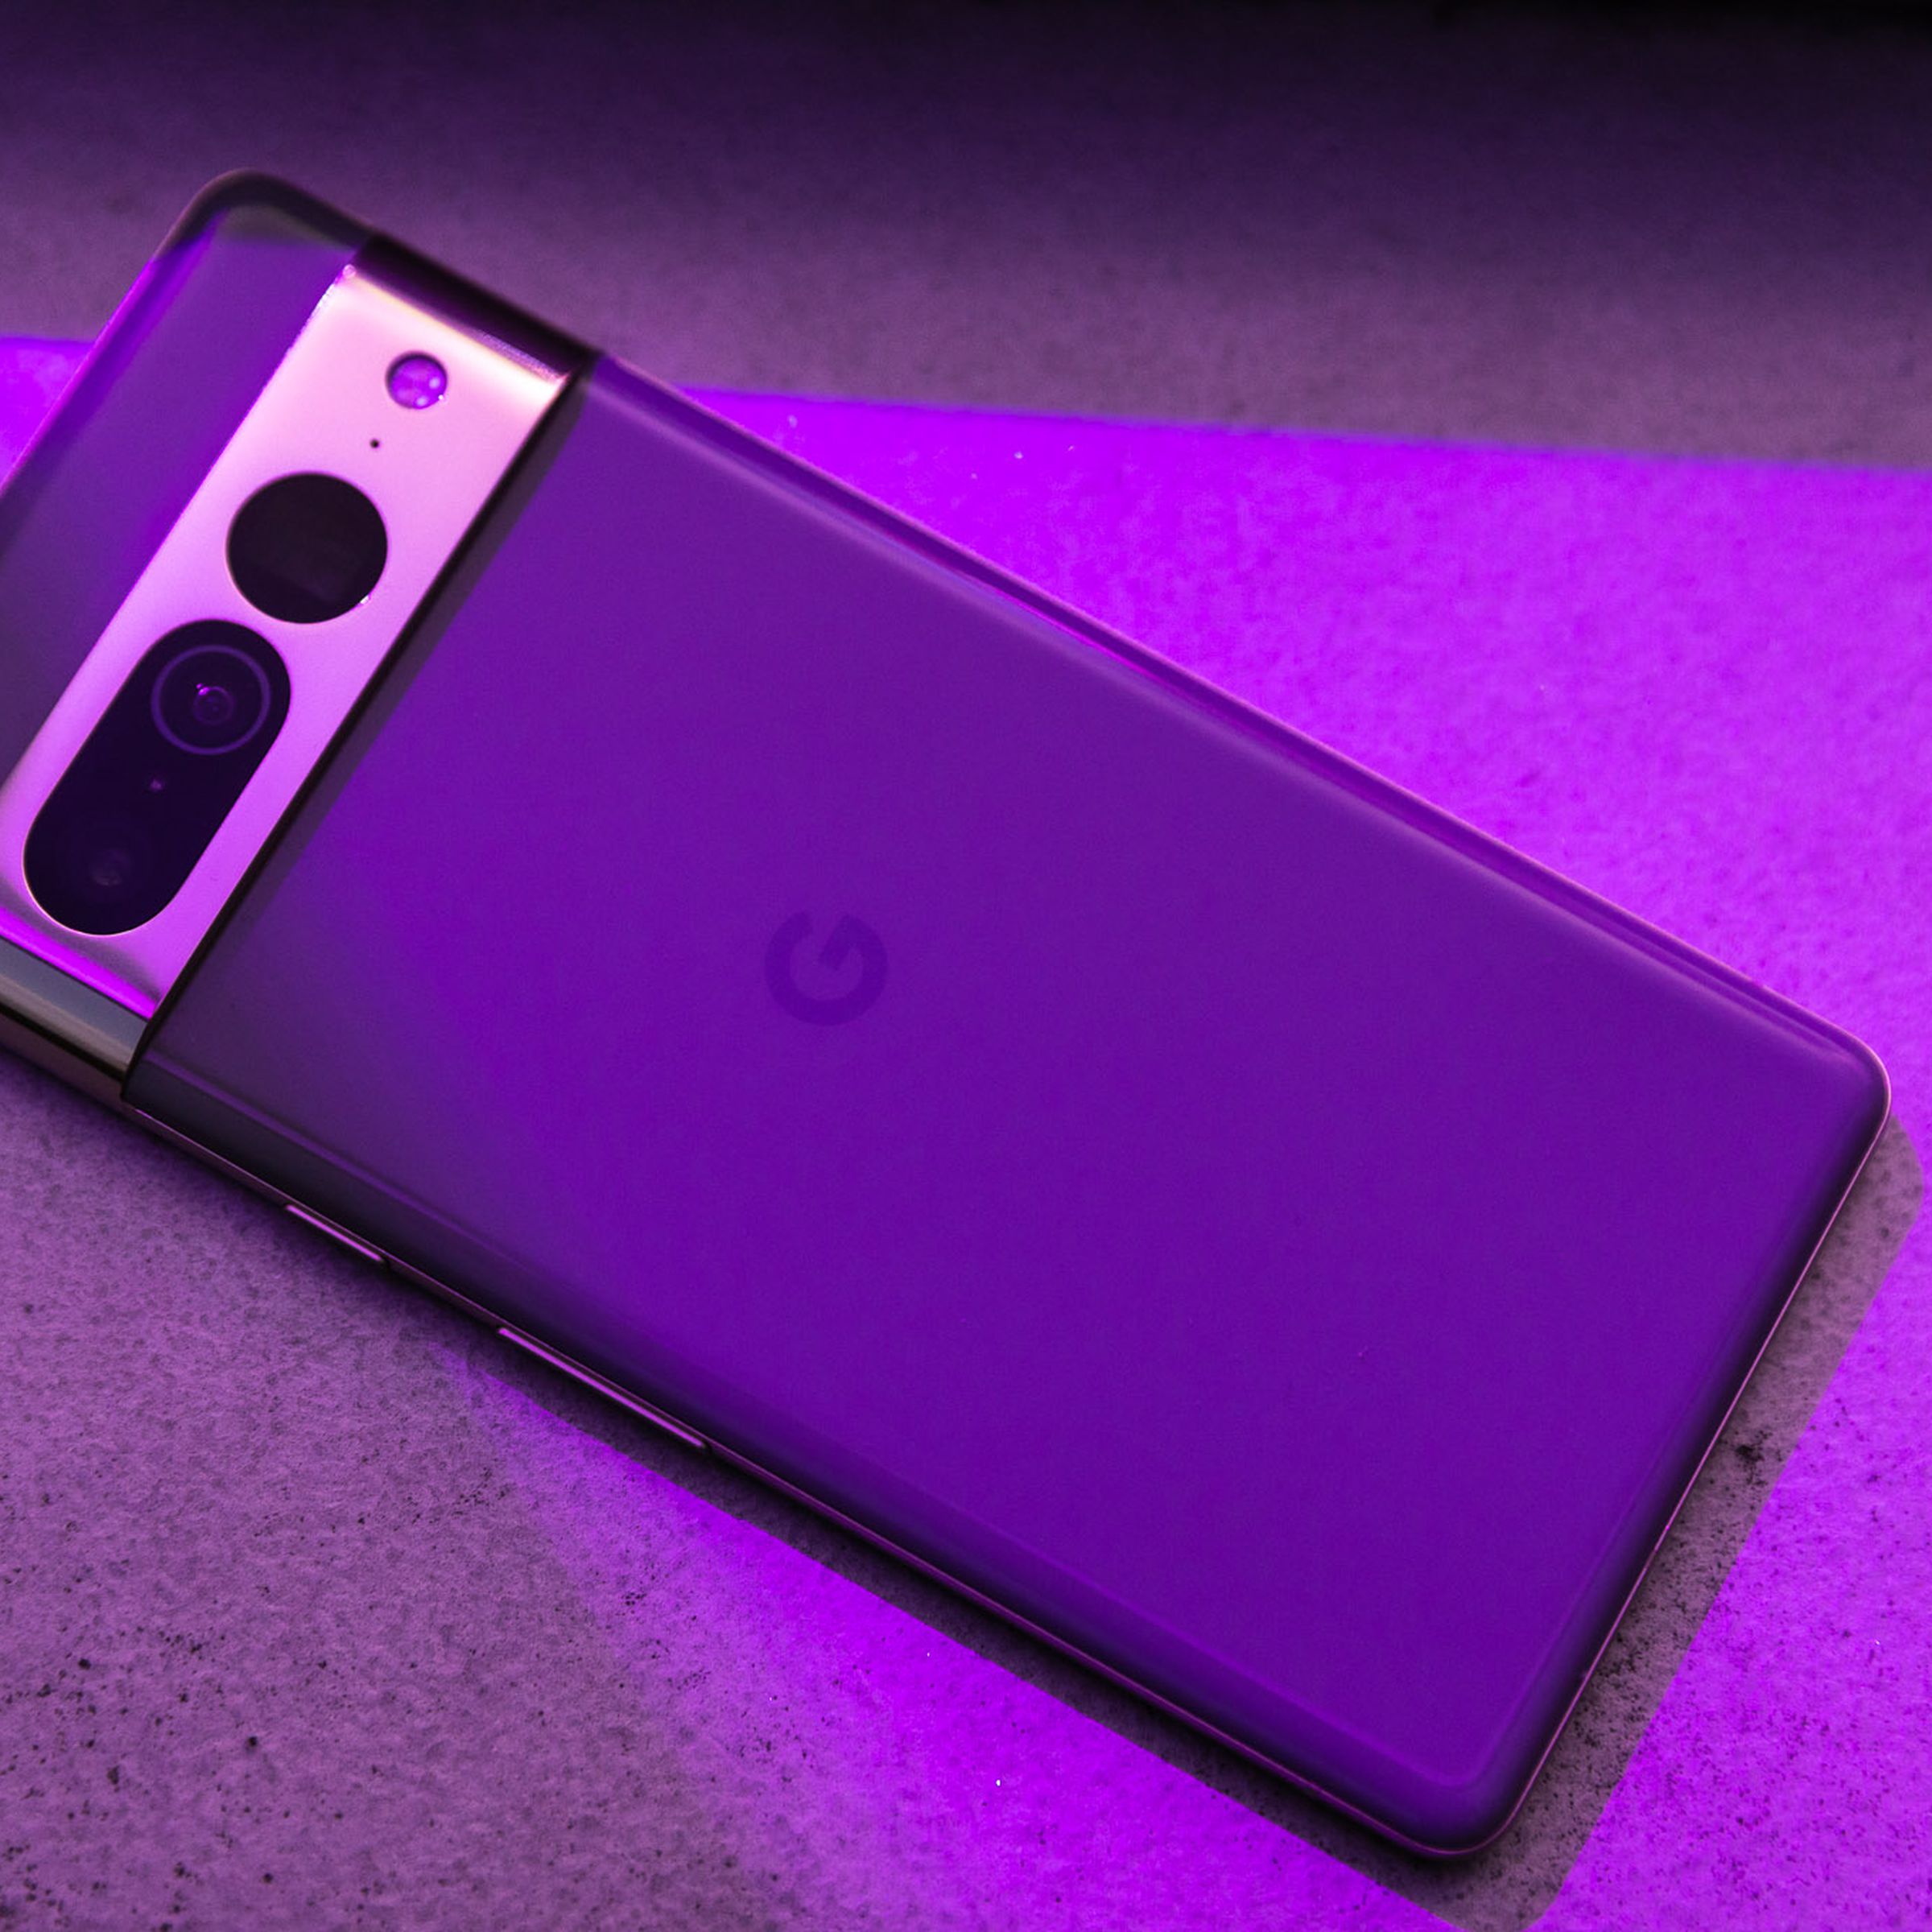 A Pixel 7 Pro with a glossy gold visor lays on its front on a table and a purple light is aimed at it.